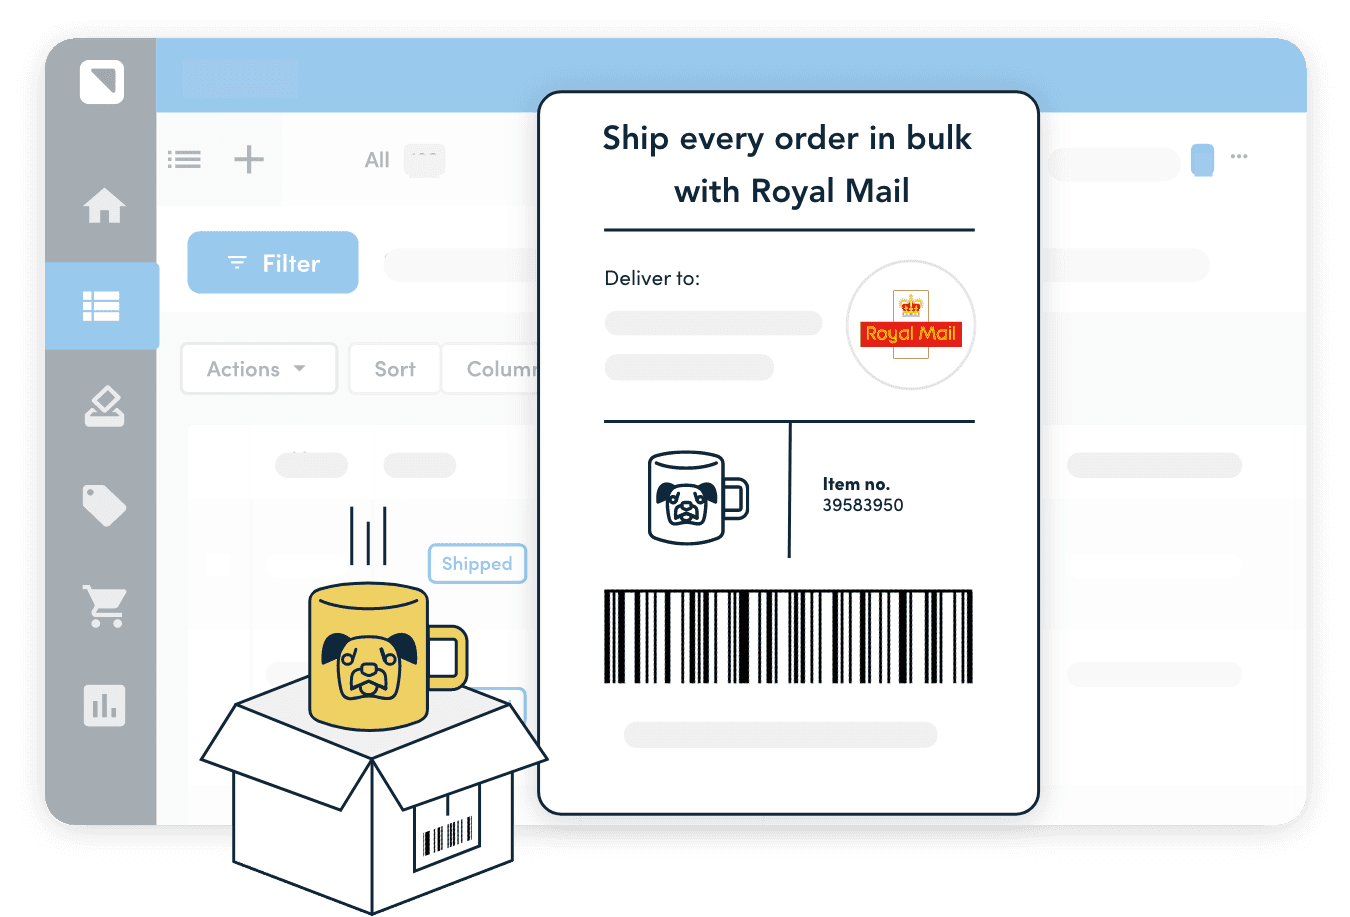 Ship every order in bulk with Royal Mail